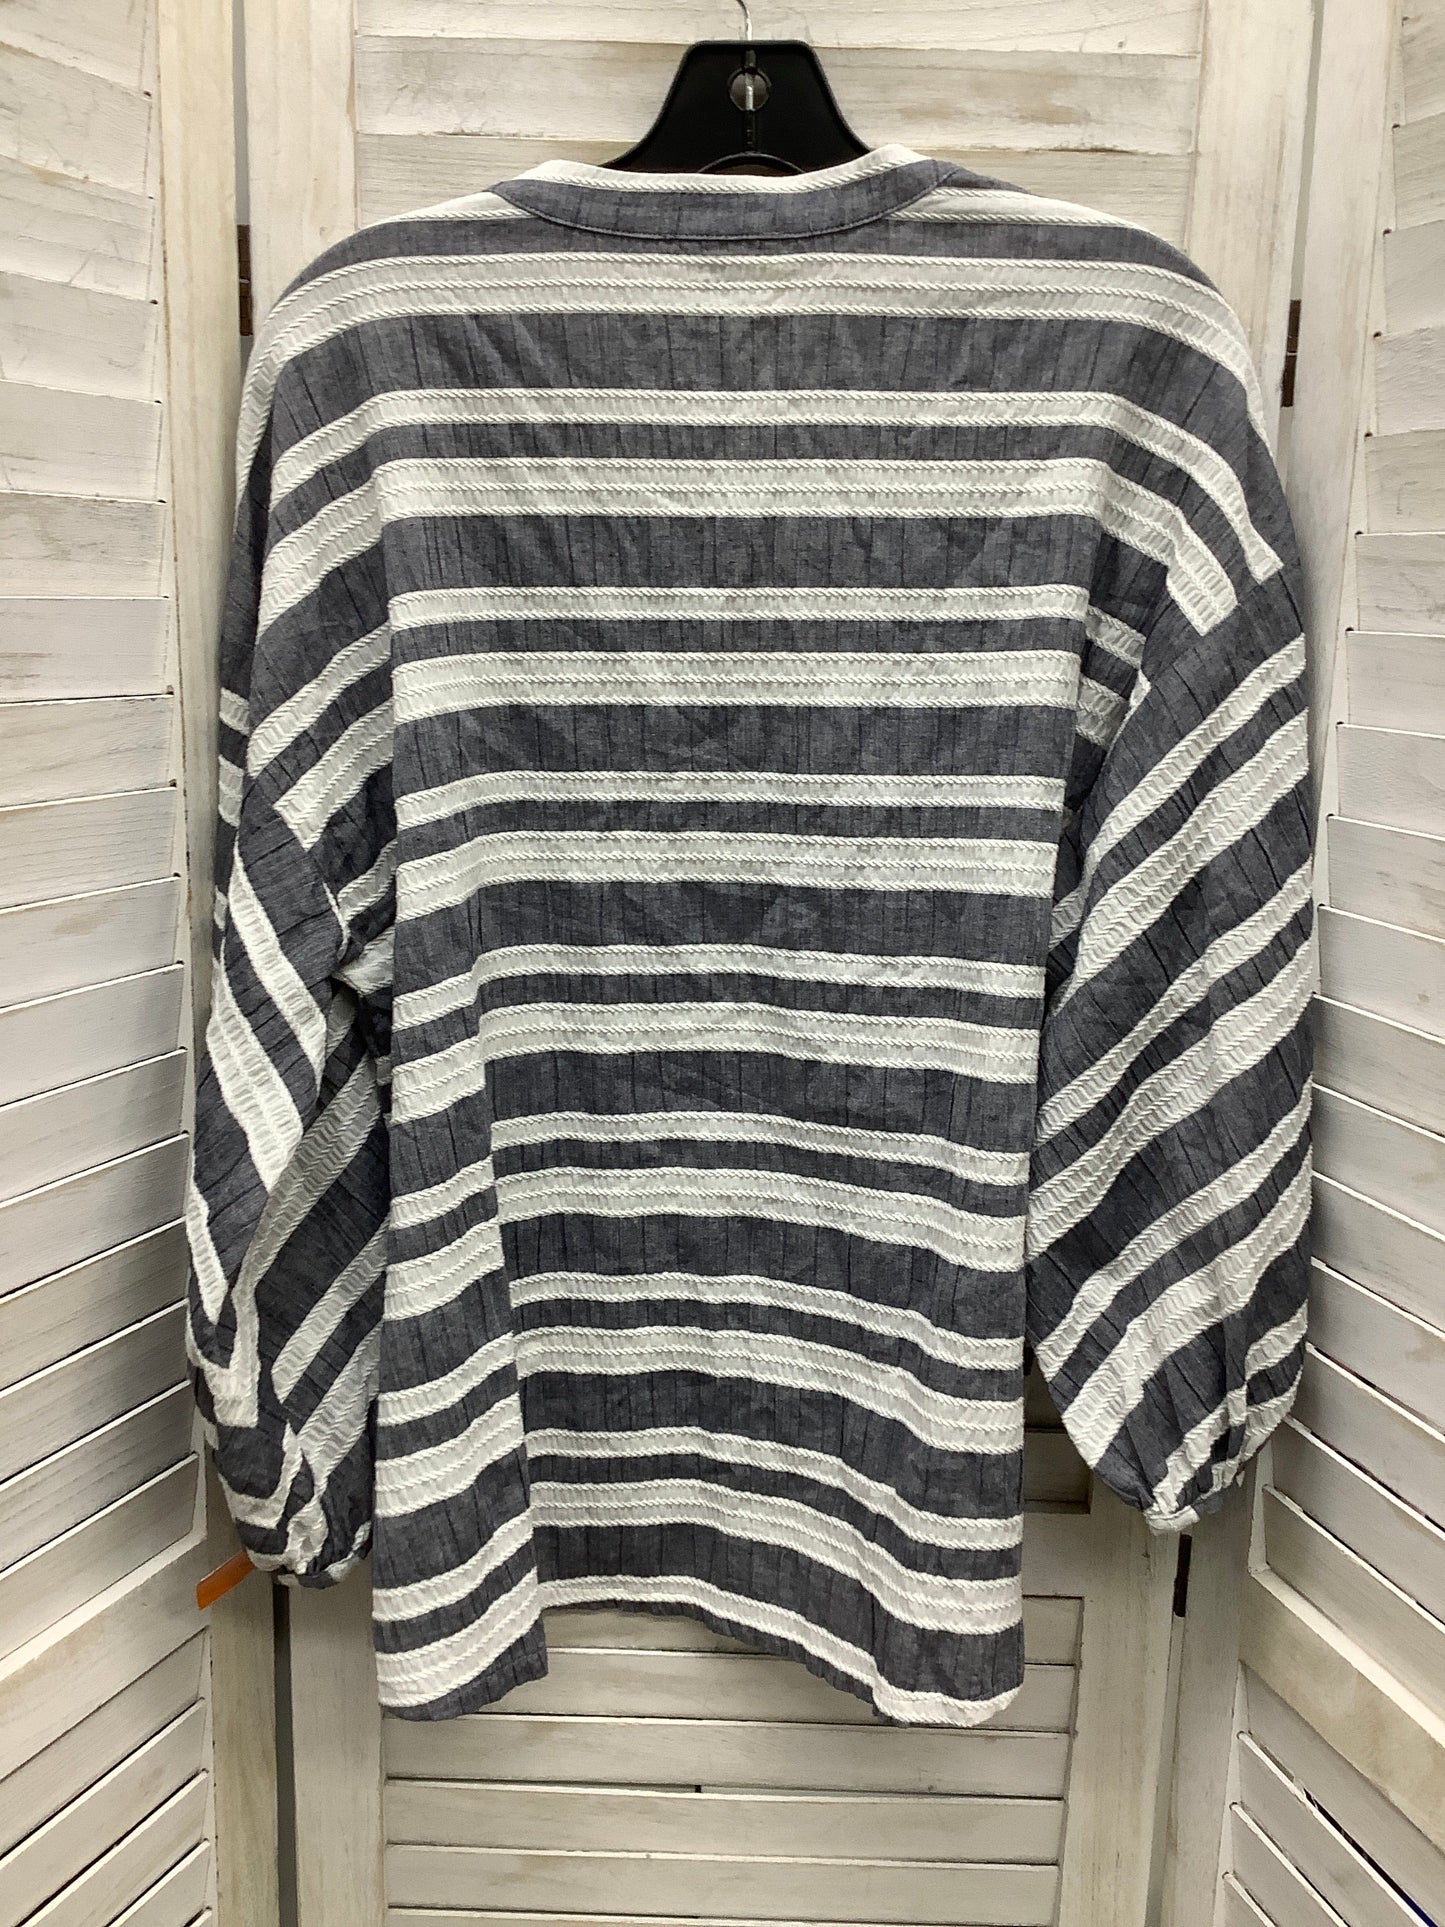 Striped Pattern Top Long Sleeve Clothes Mentor, Size L